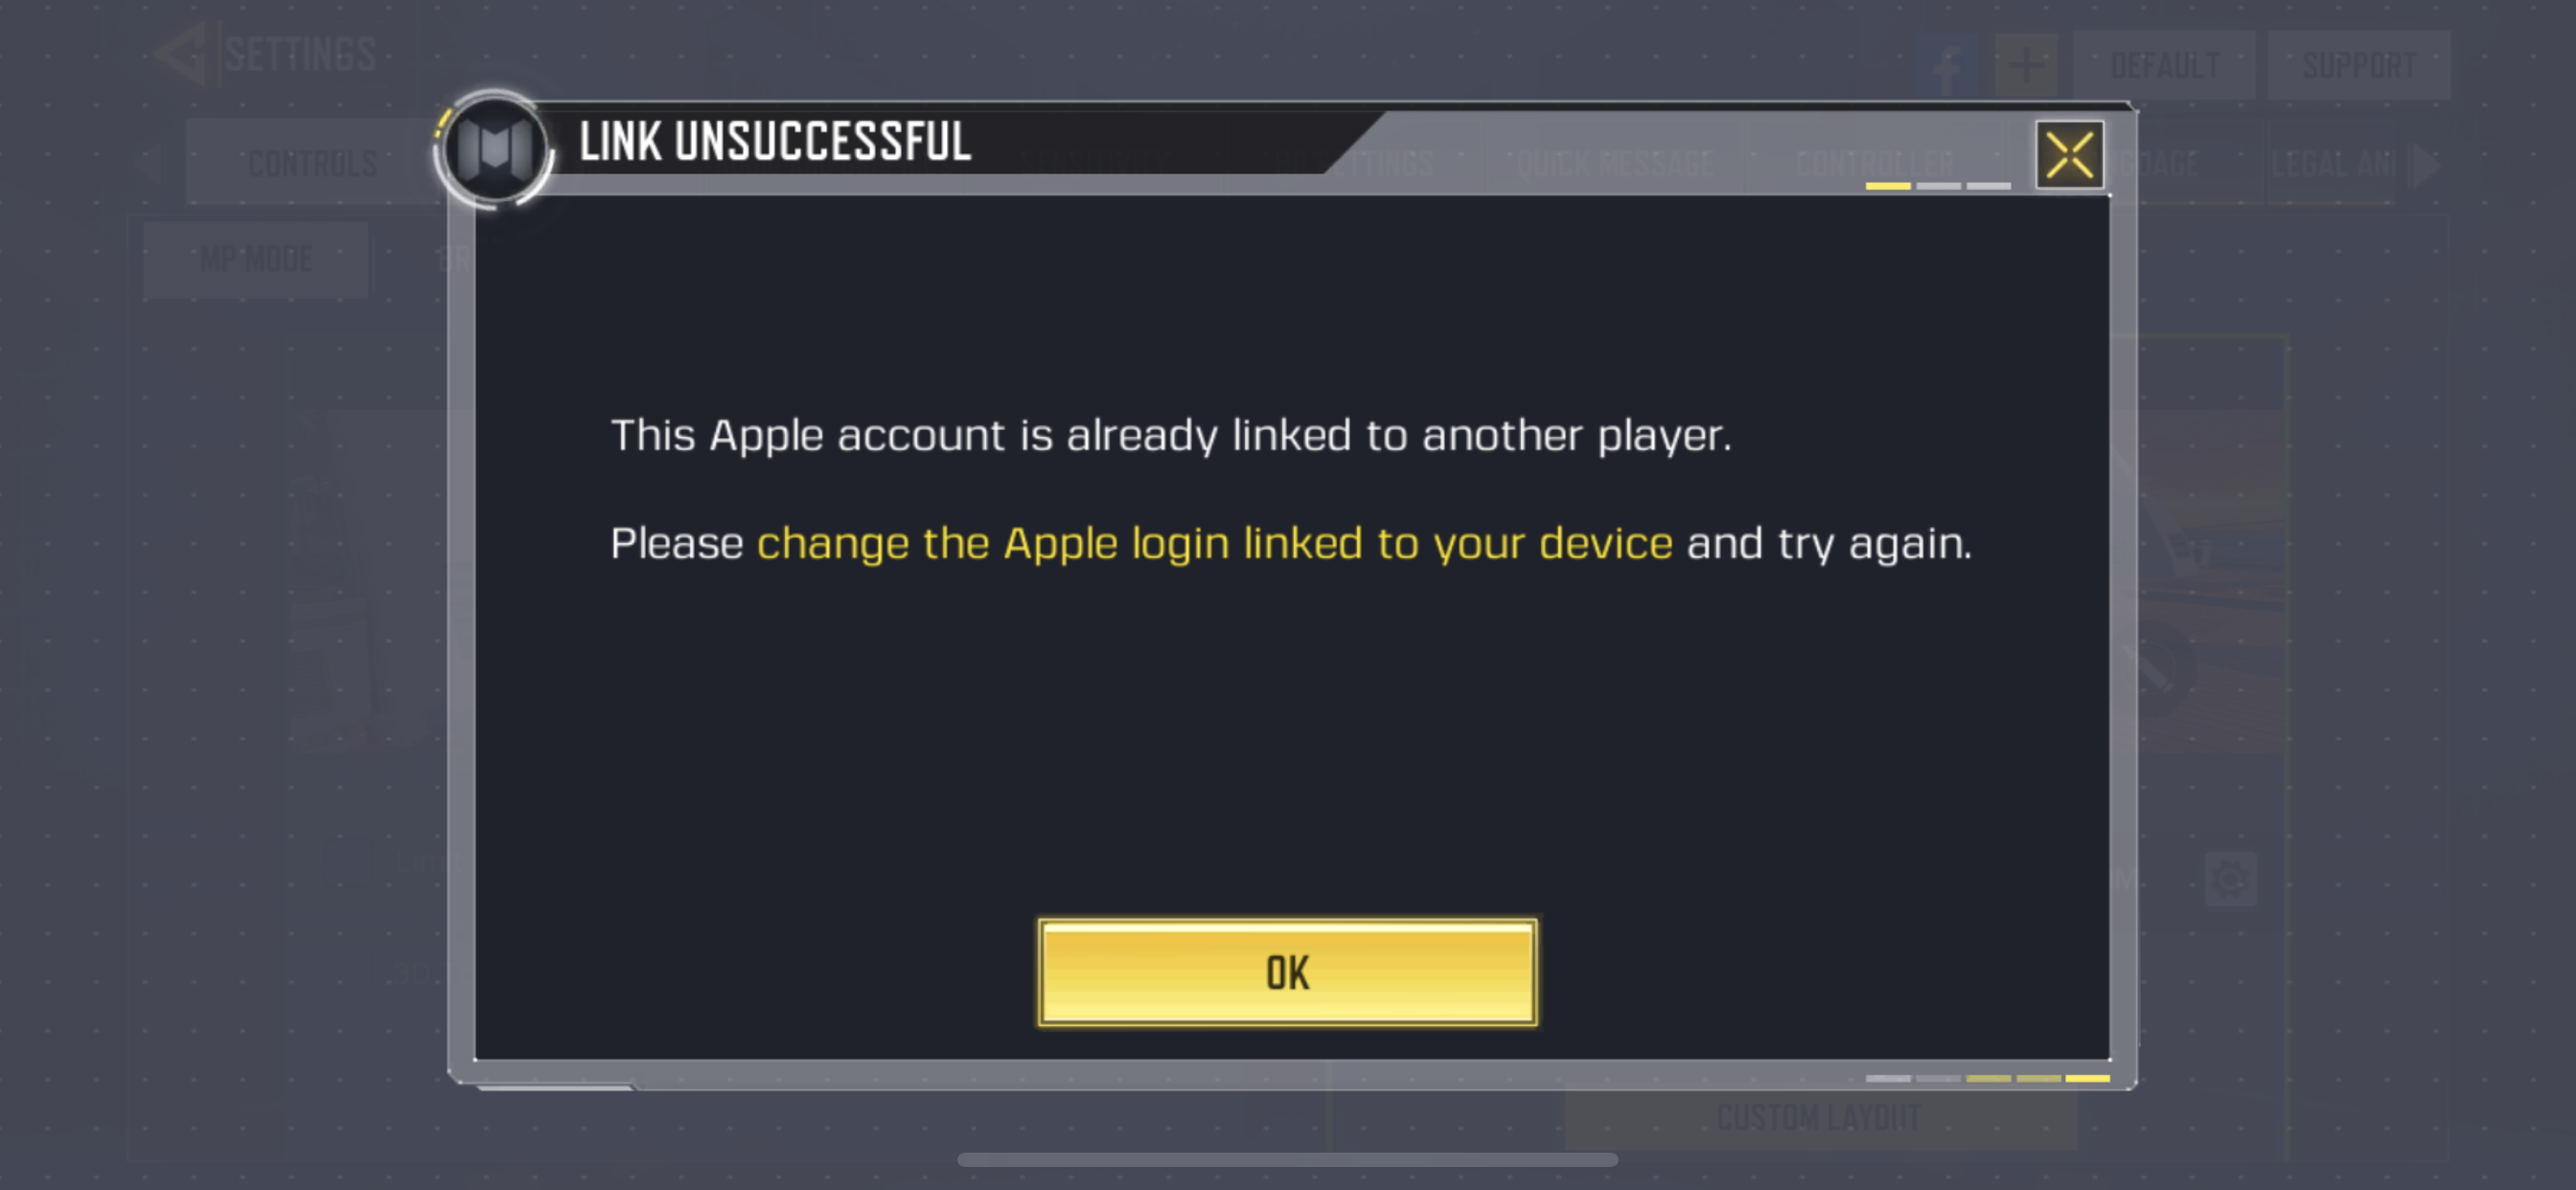 How to Delete CoD Mobile Account - Android and iOS